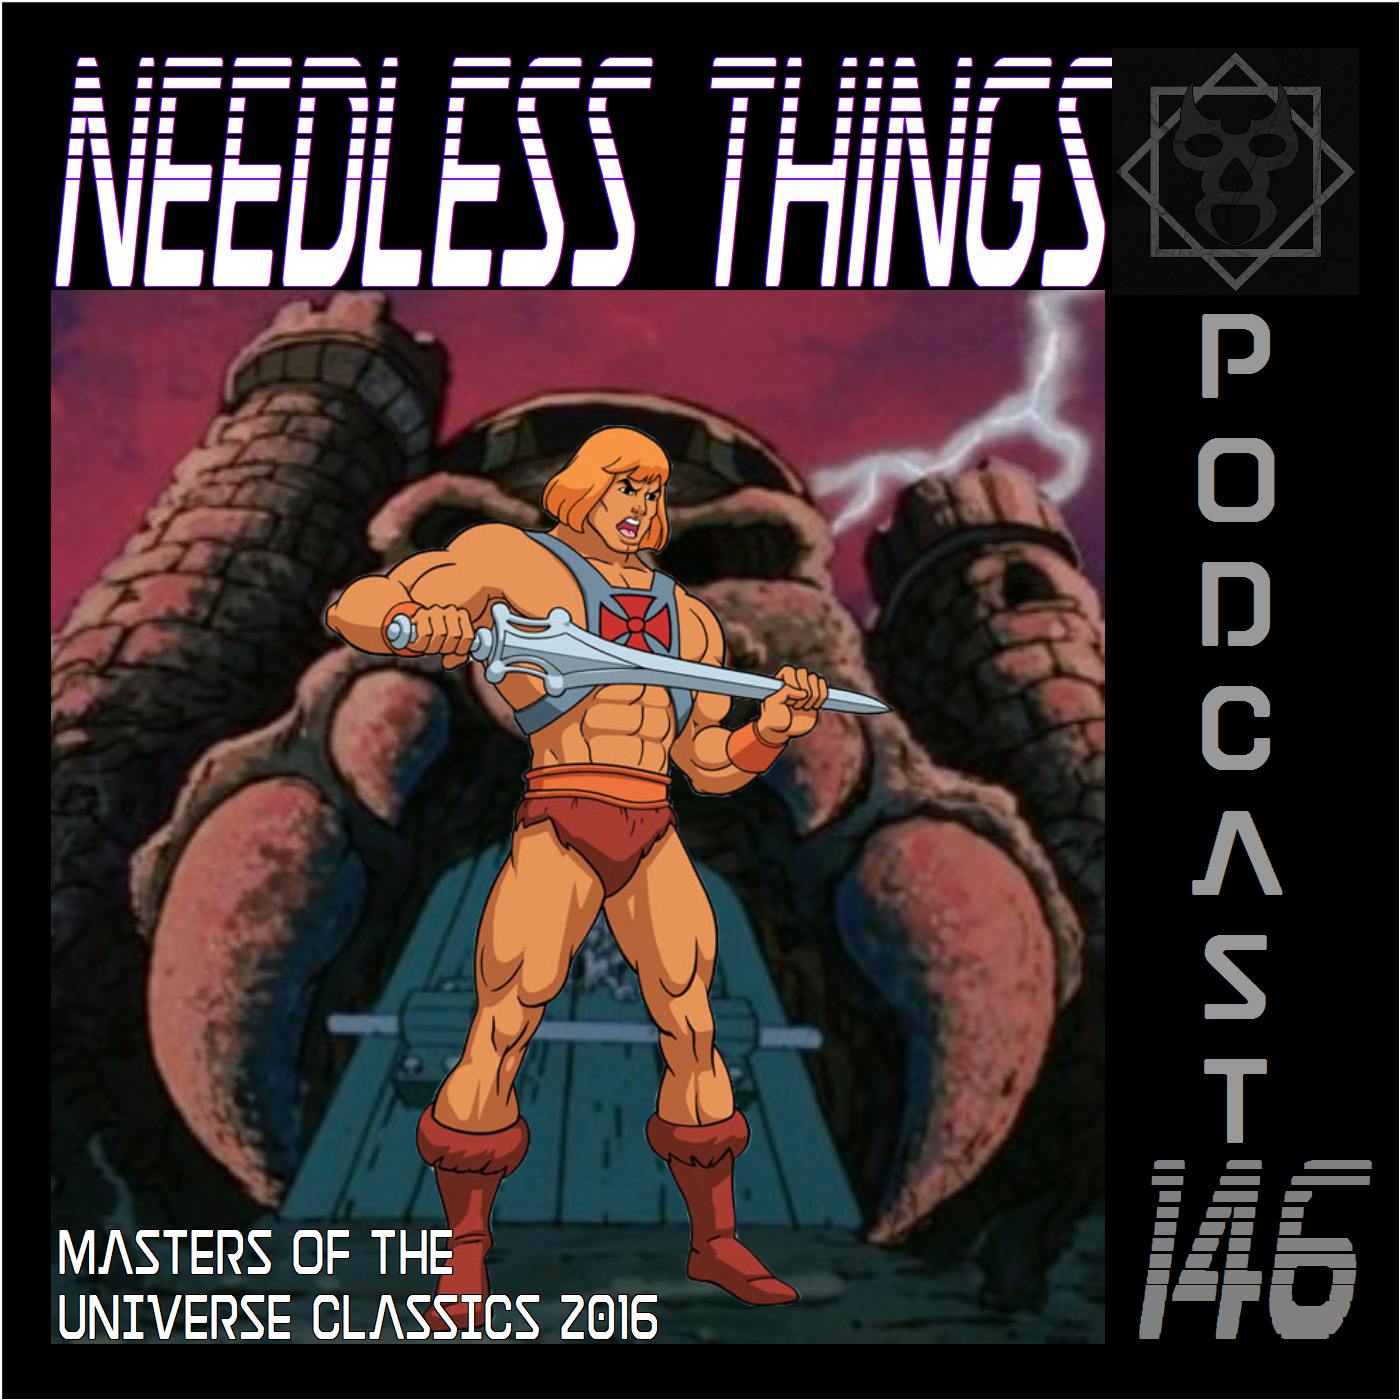 Needless Things Podcast 146 – Masters of the Universe Classics 2016